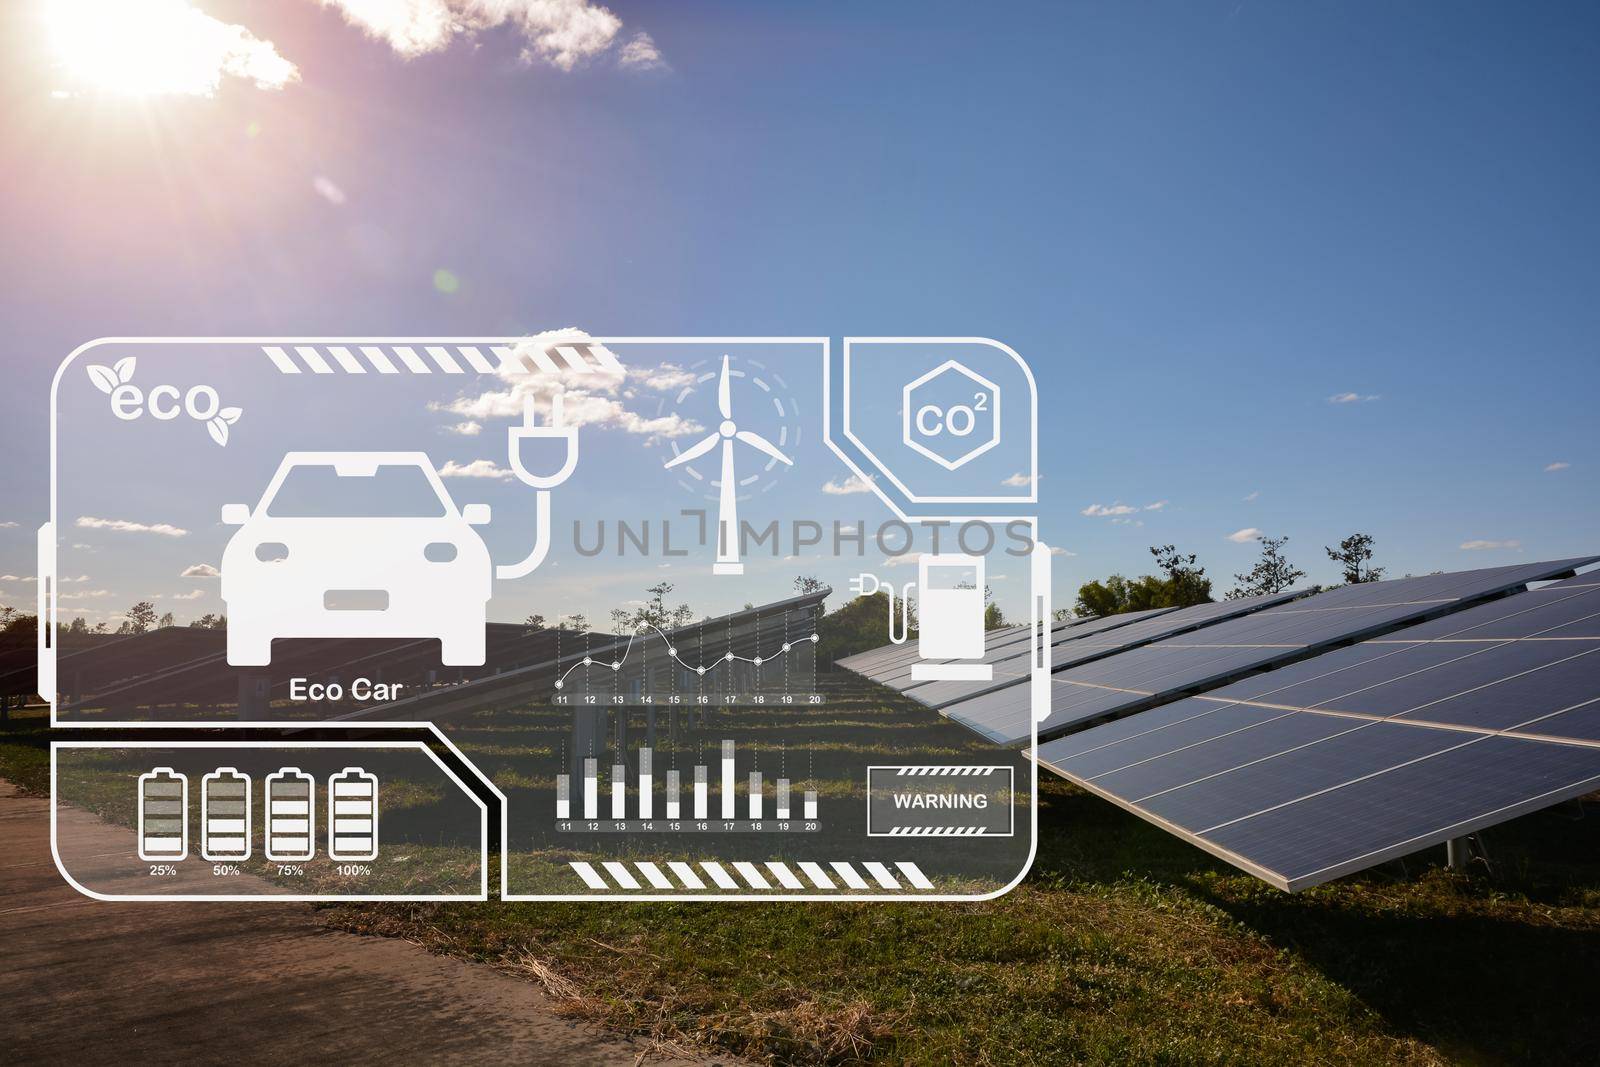 Eco green energy technology transport. solar panels on sunny day with environment Icons for charging electric car power or EV car, photovoltaic alternative electricity source